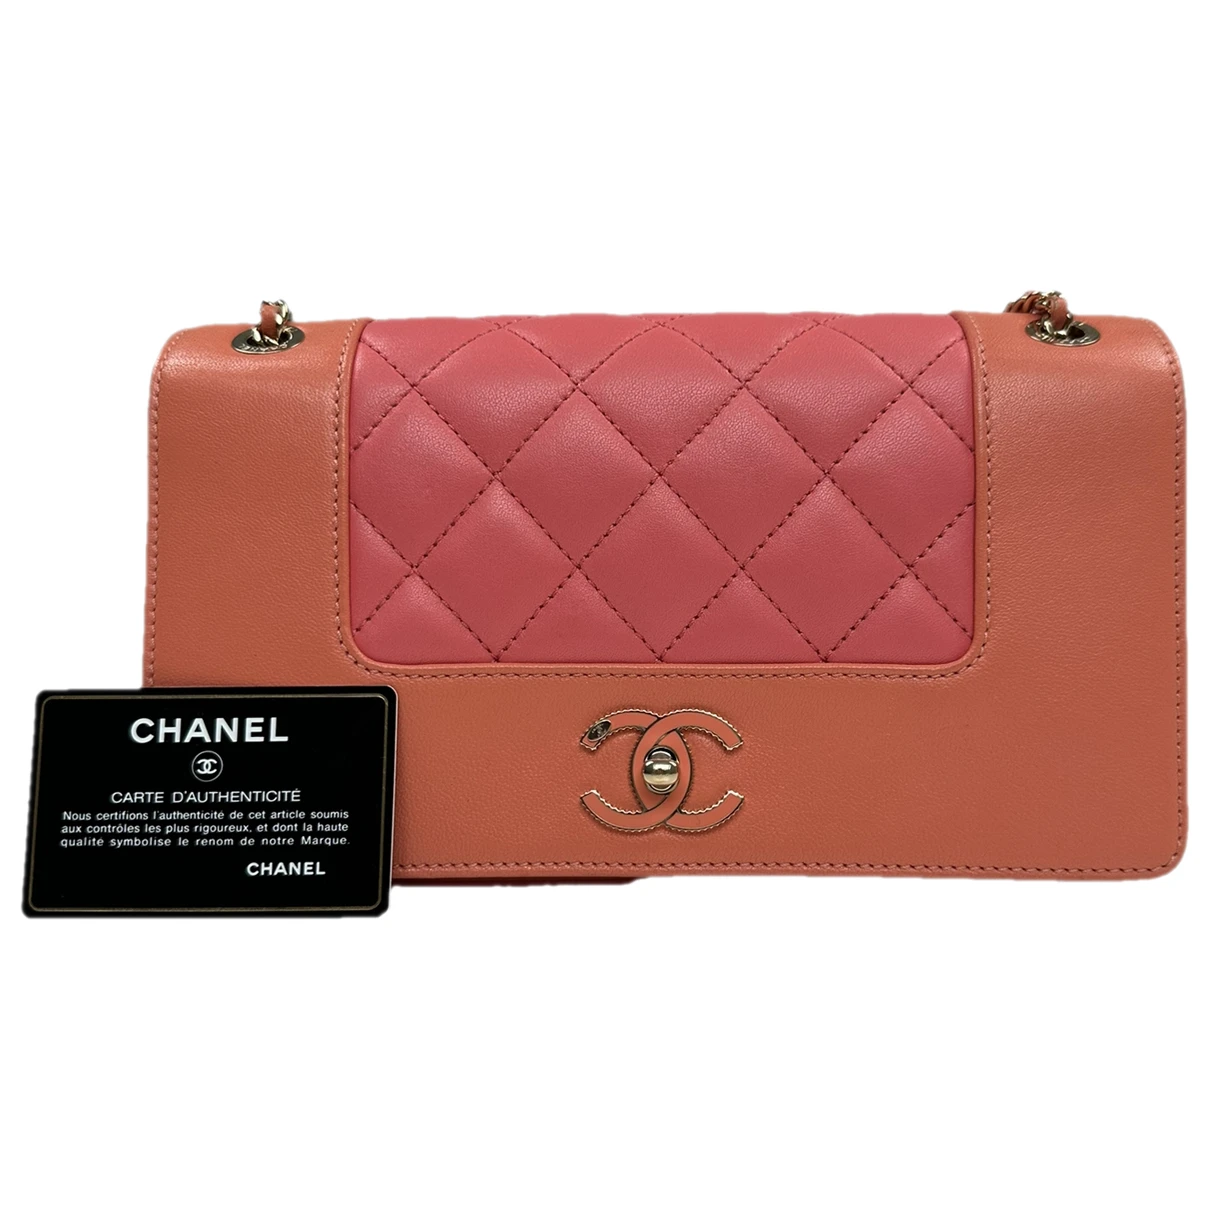 Pre-owned Chanel Timeless/classique Leather Crossbody Bag In Orange